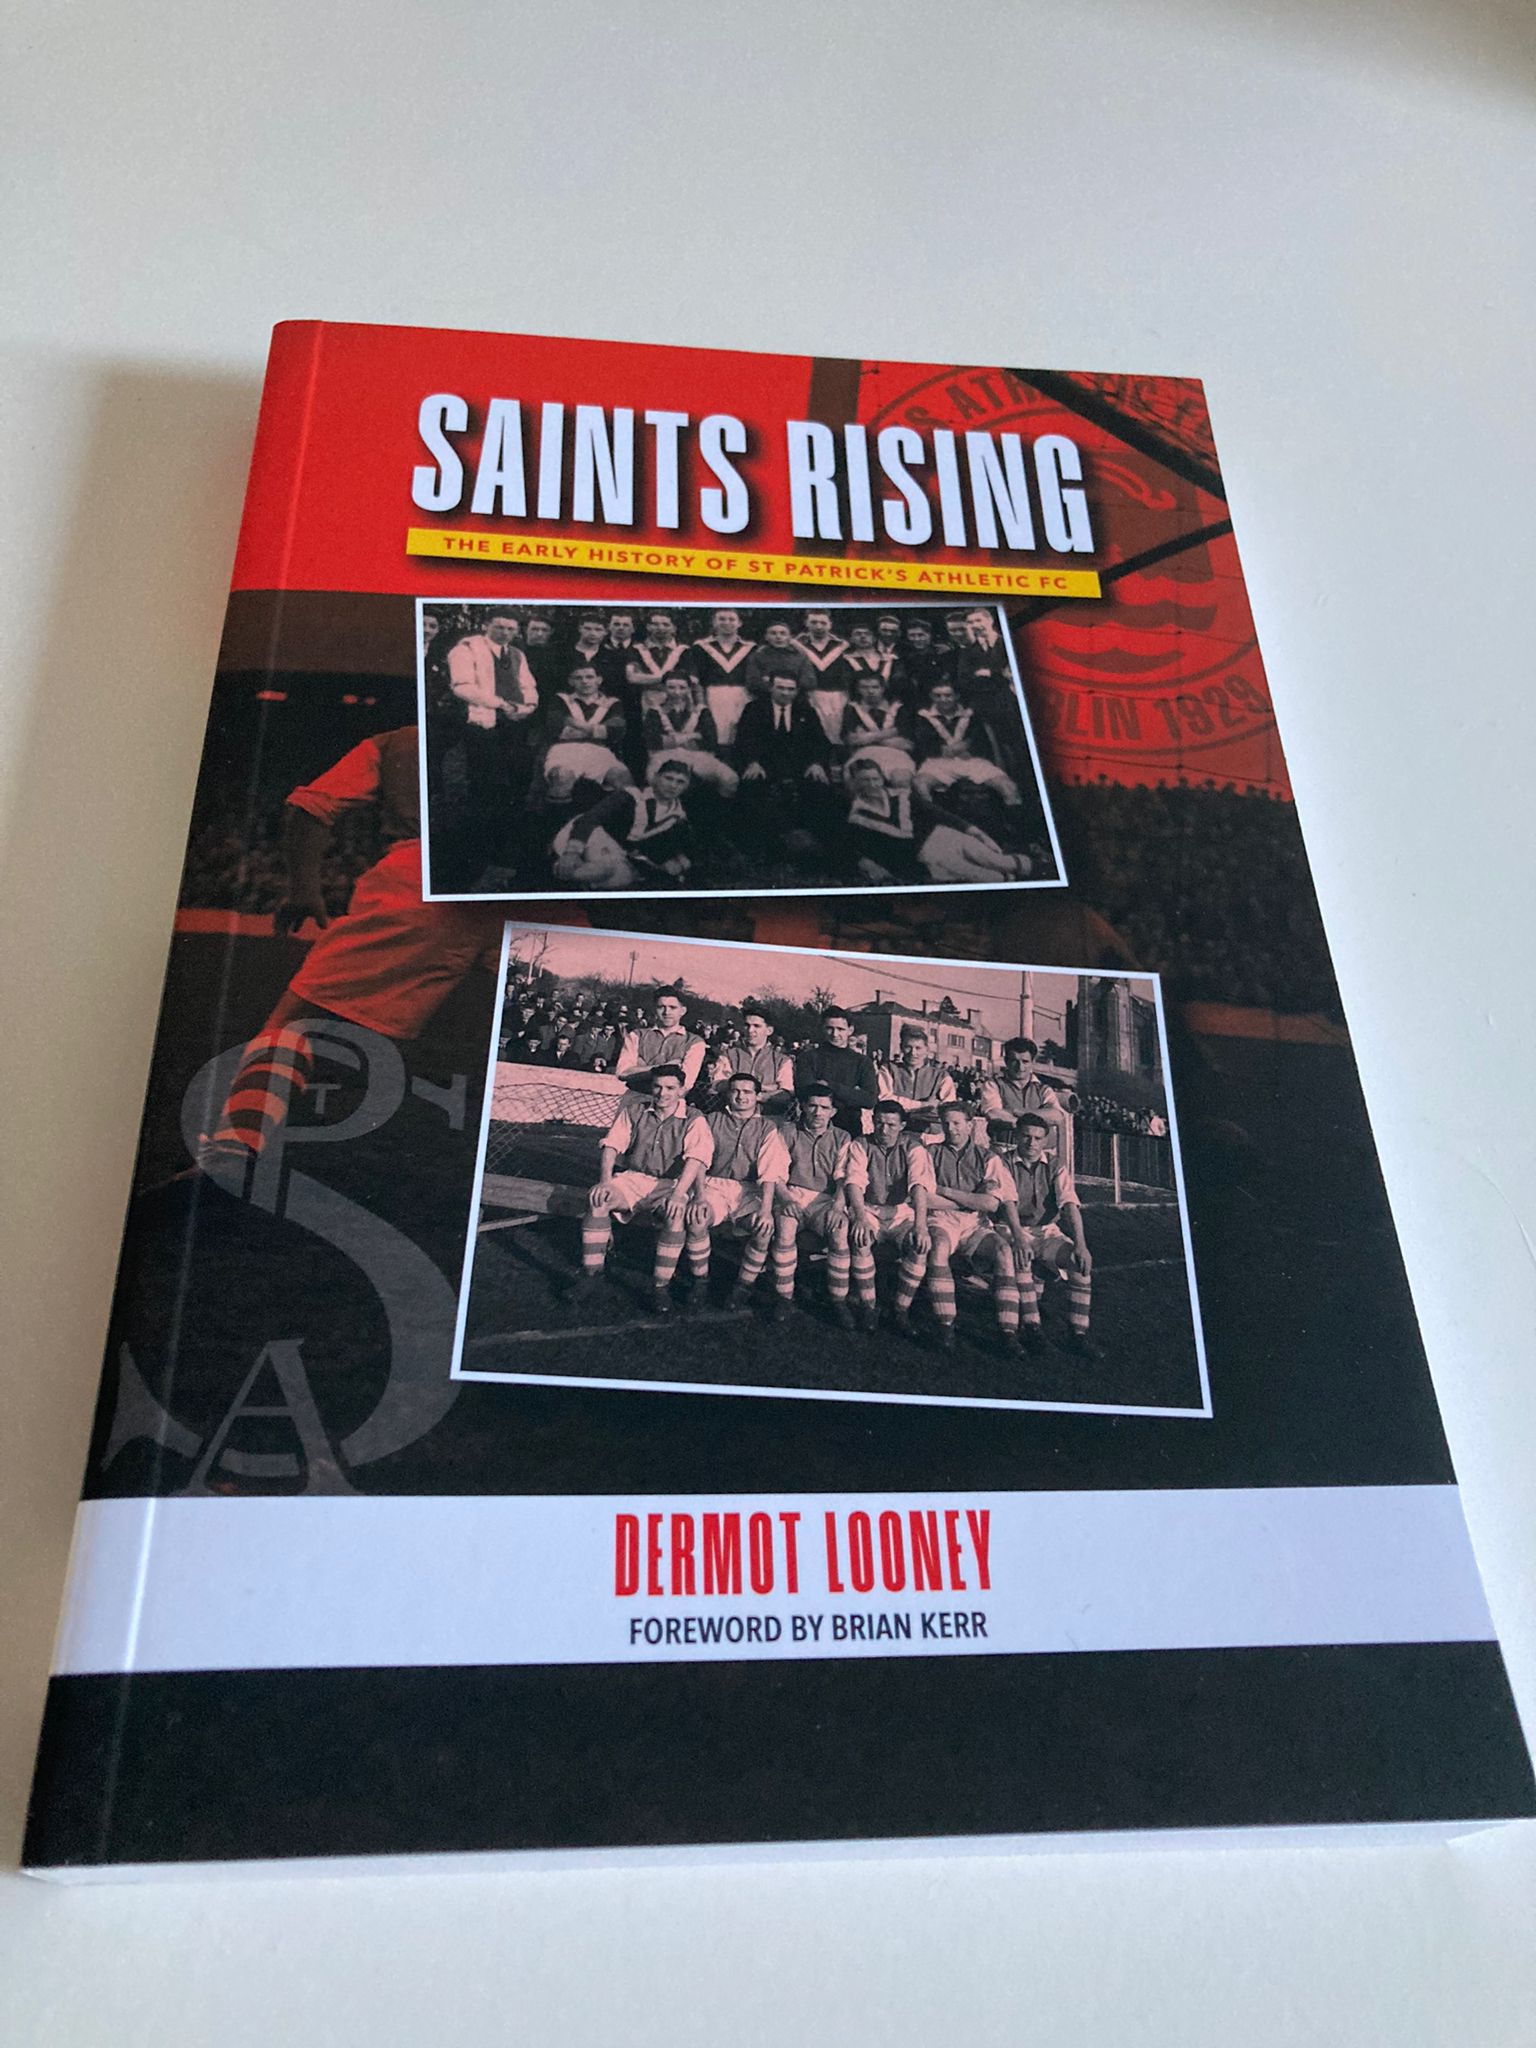 Saints Rising: The Early History of St Patrick's Athletic